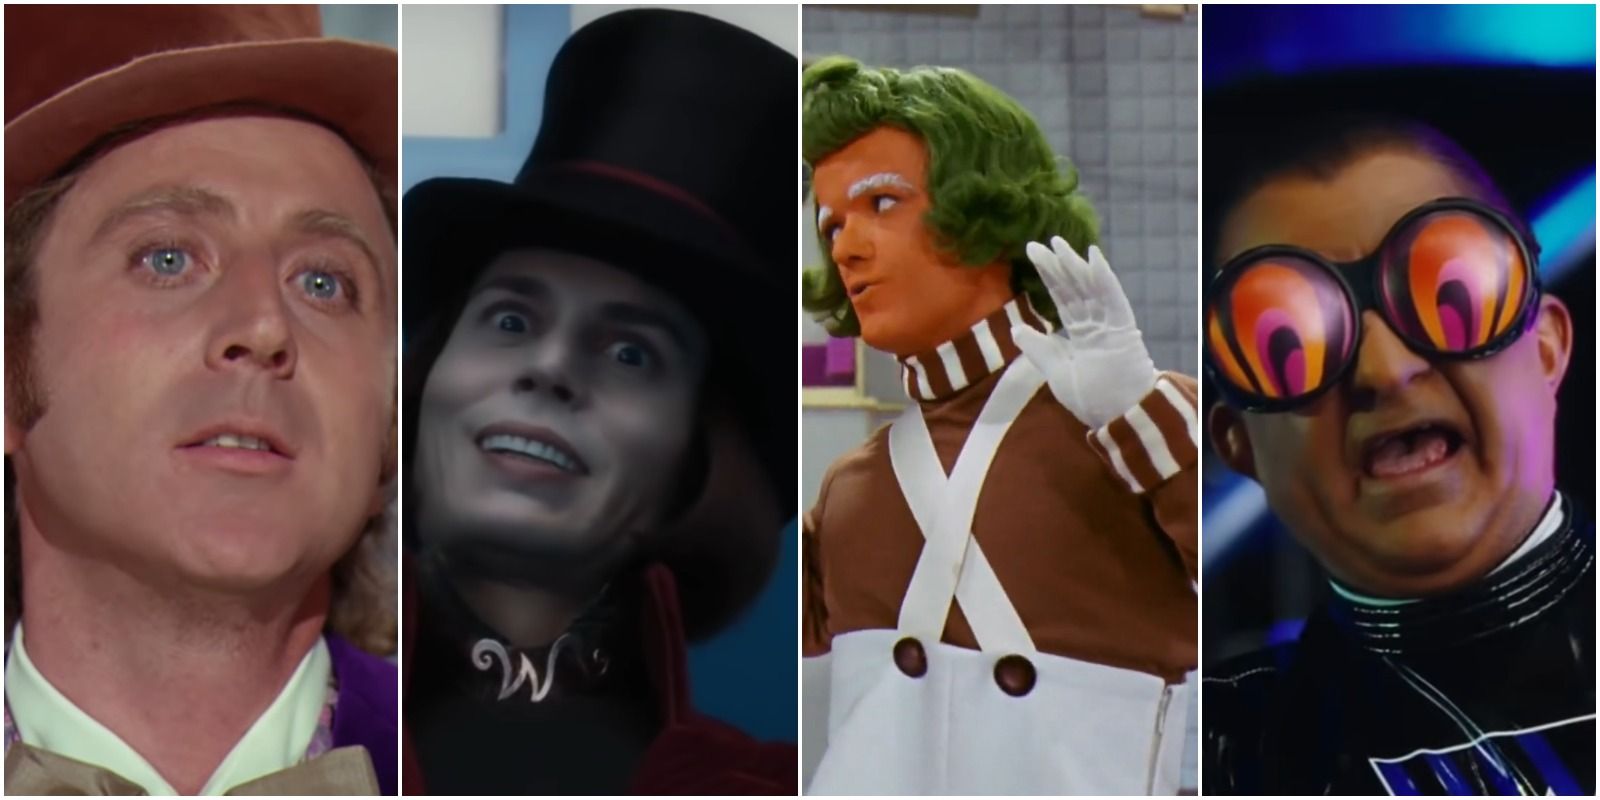 willy wonka and the chocolate factory album artist